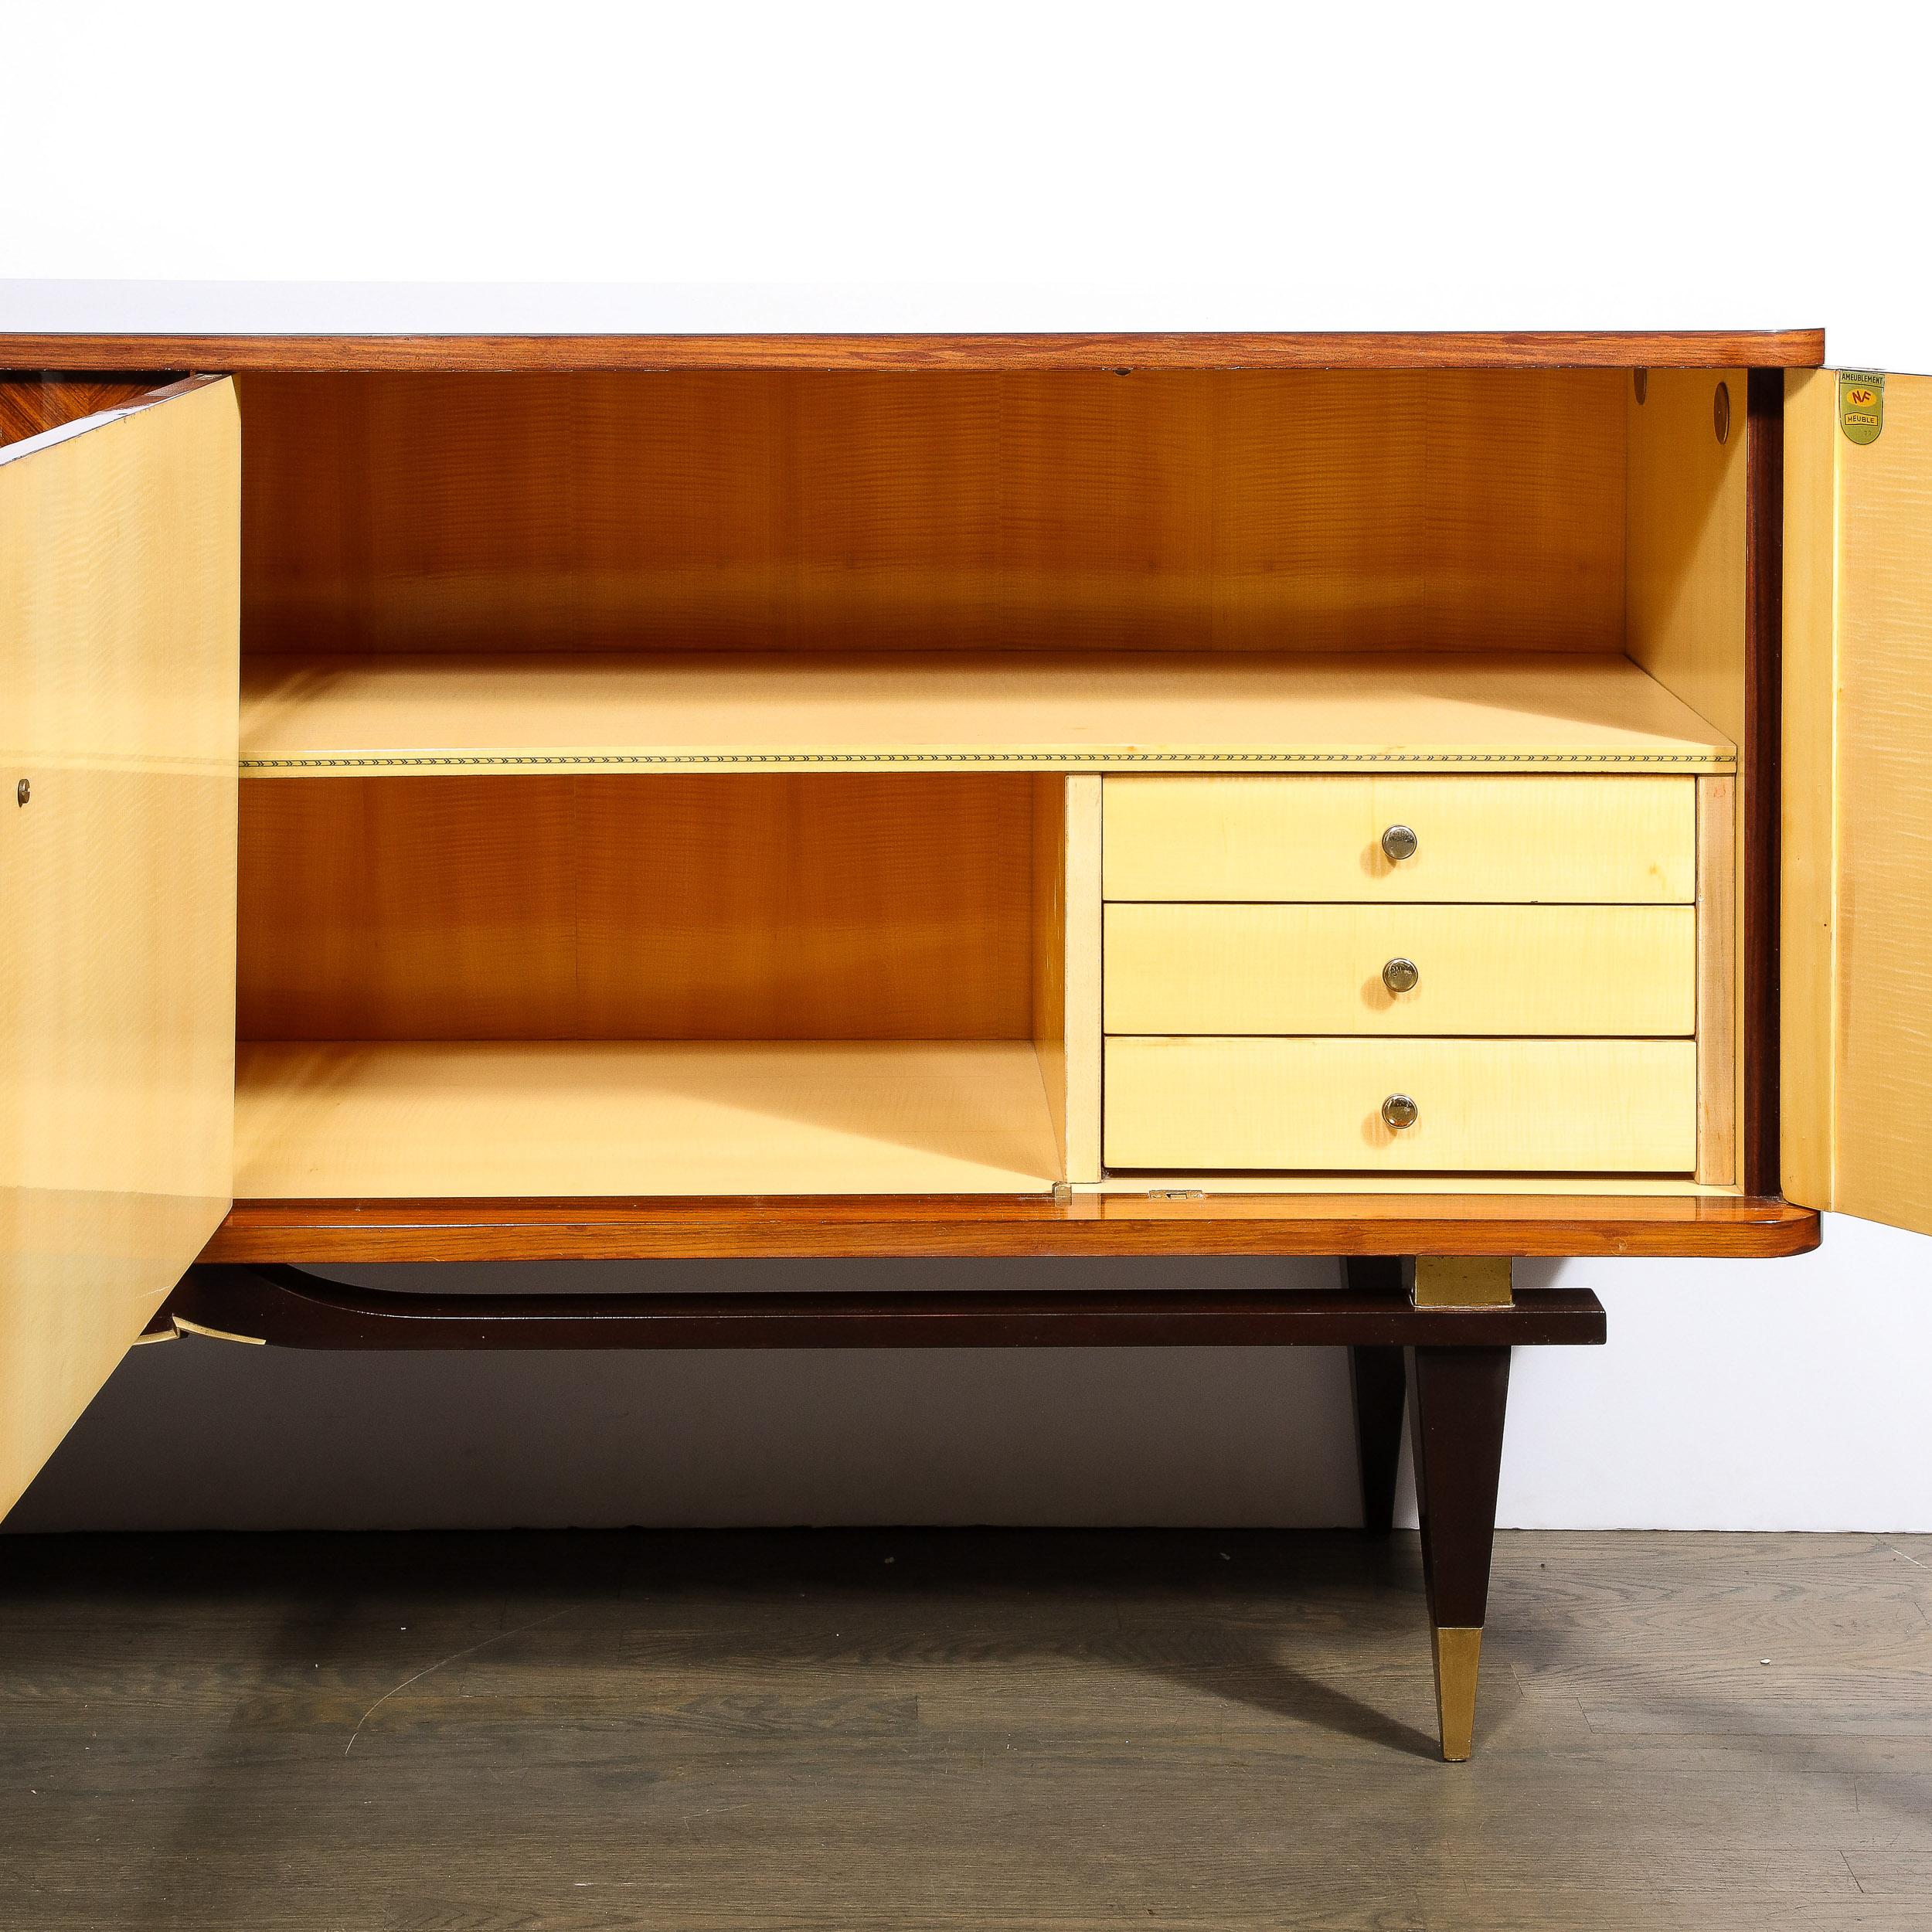 Brass Mid-Century Sideboard in Book-Matched Walnut & Rosewood with Tulip Wood Inlays